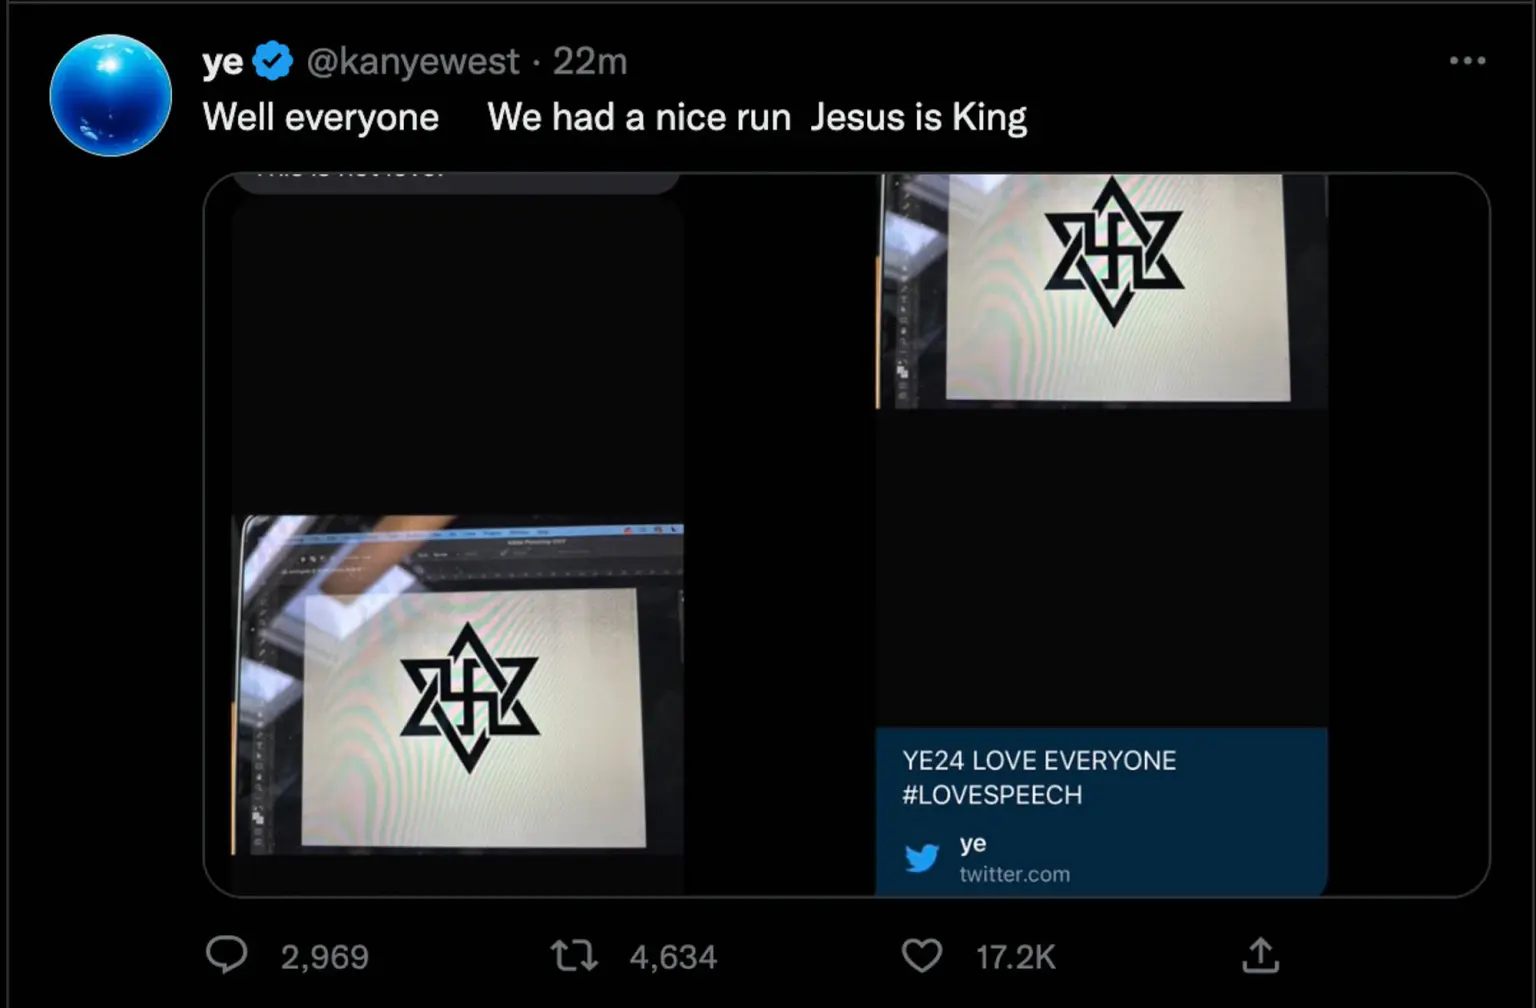 Tweet from @kanyewest saying 'Well everyone   We had a nice run Jesus is King' followed by a Jewish Star of David with a swastika embedded in the middle, followed by 'YE24 LOVE EVERYONE #LOVESPEECH'